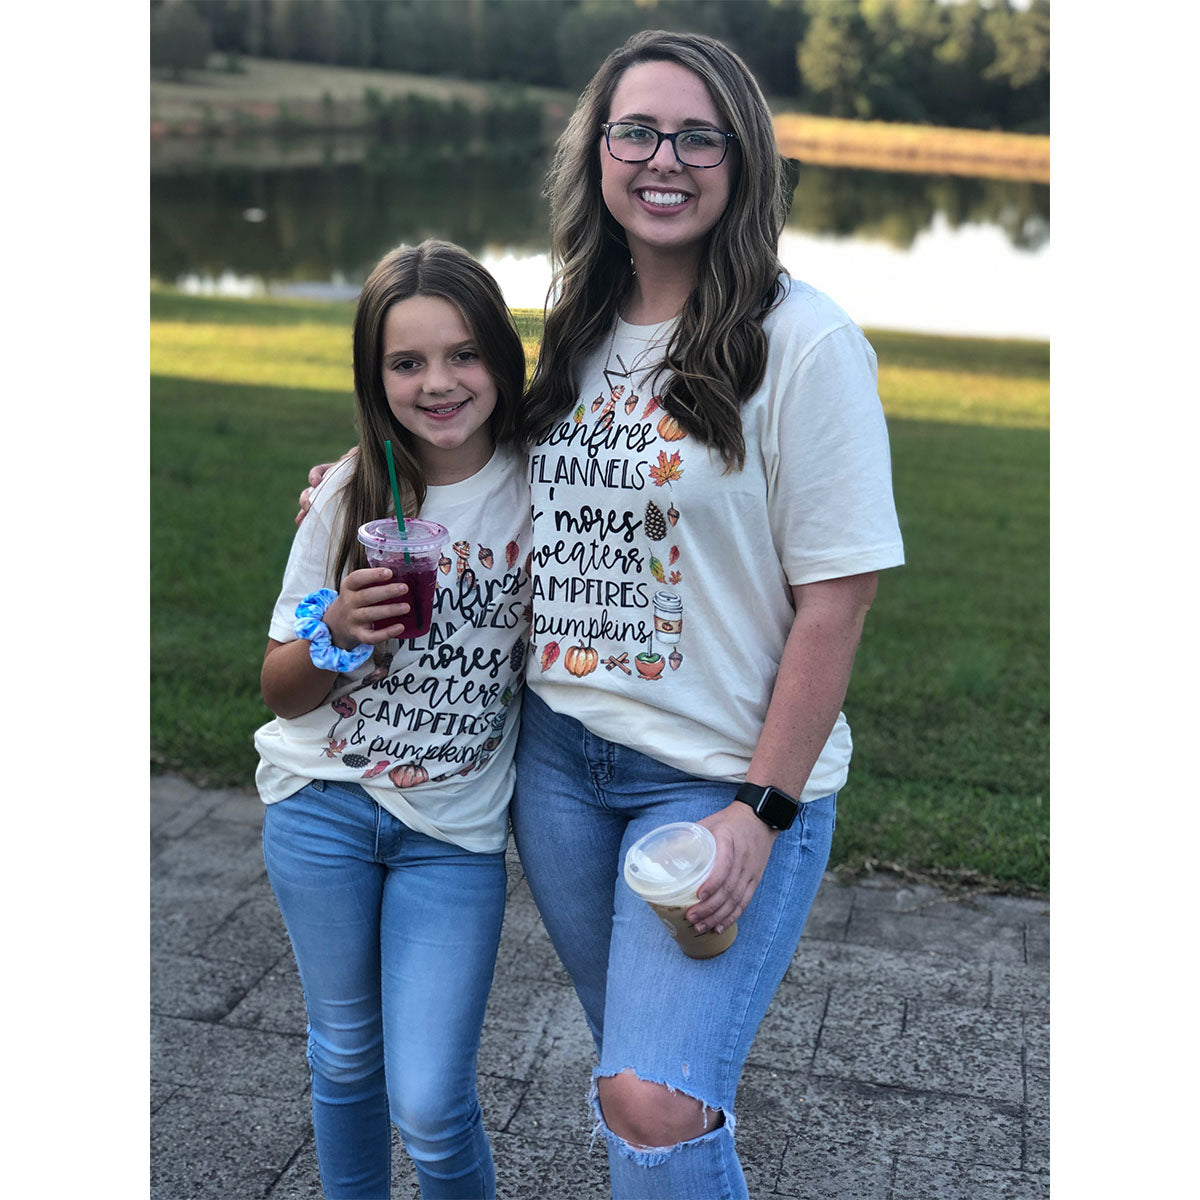 BONFIRE FLANNELS SMORES AND MORE FALL TEE - Southern Grace Creations